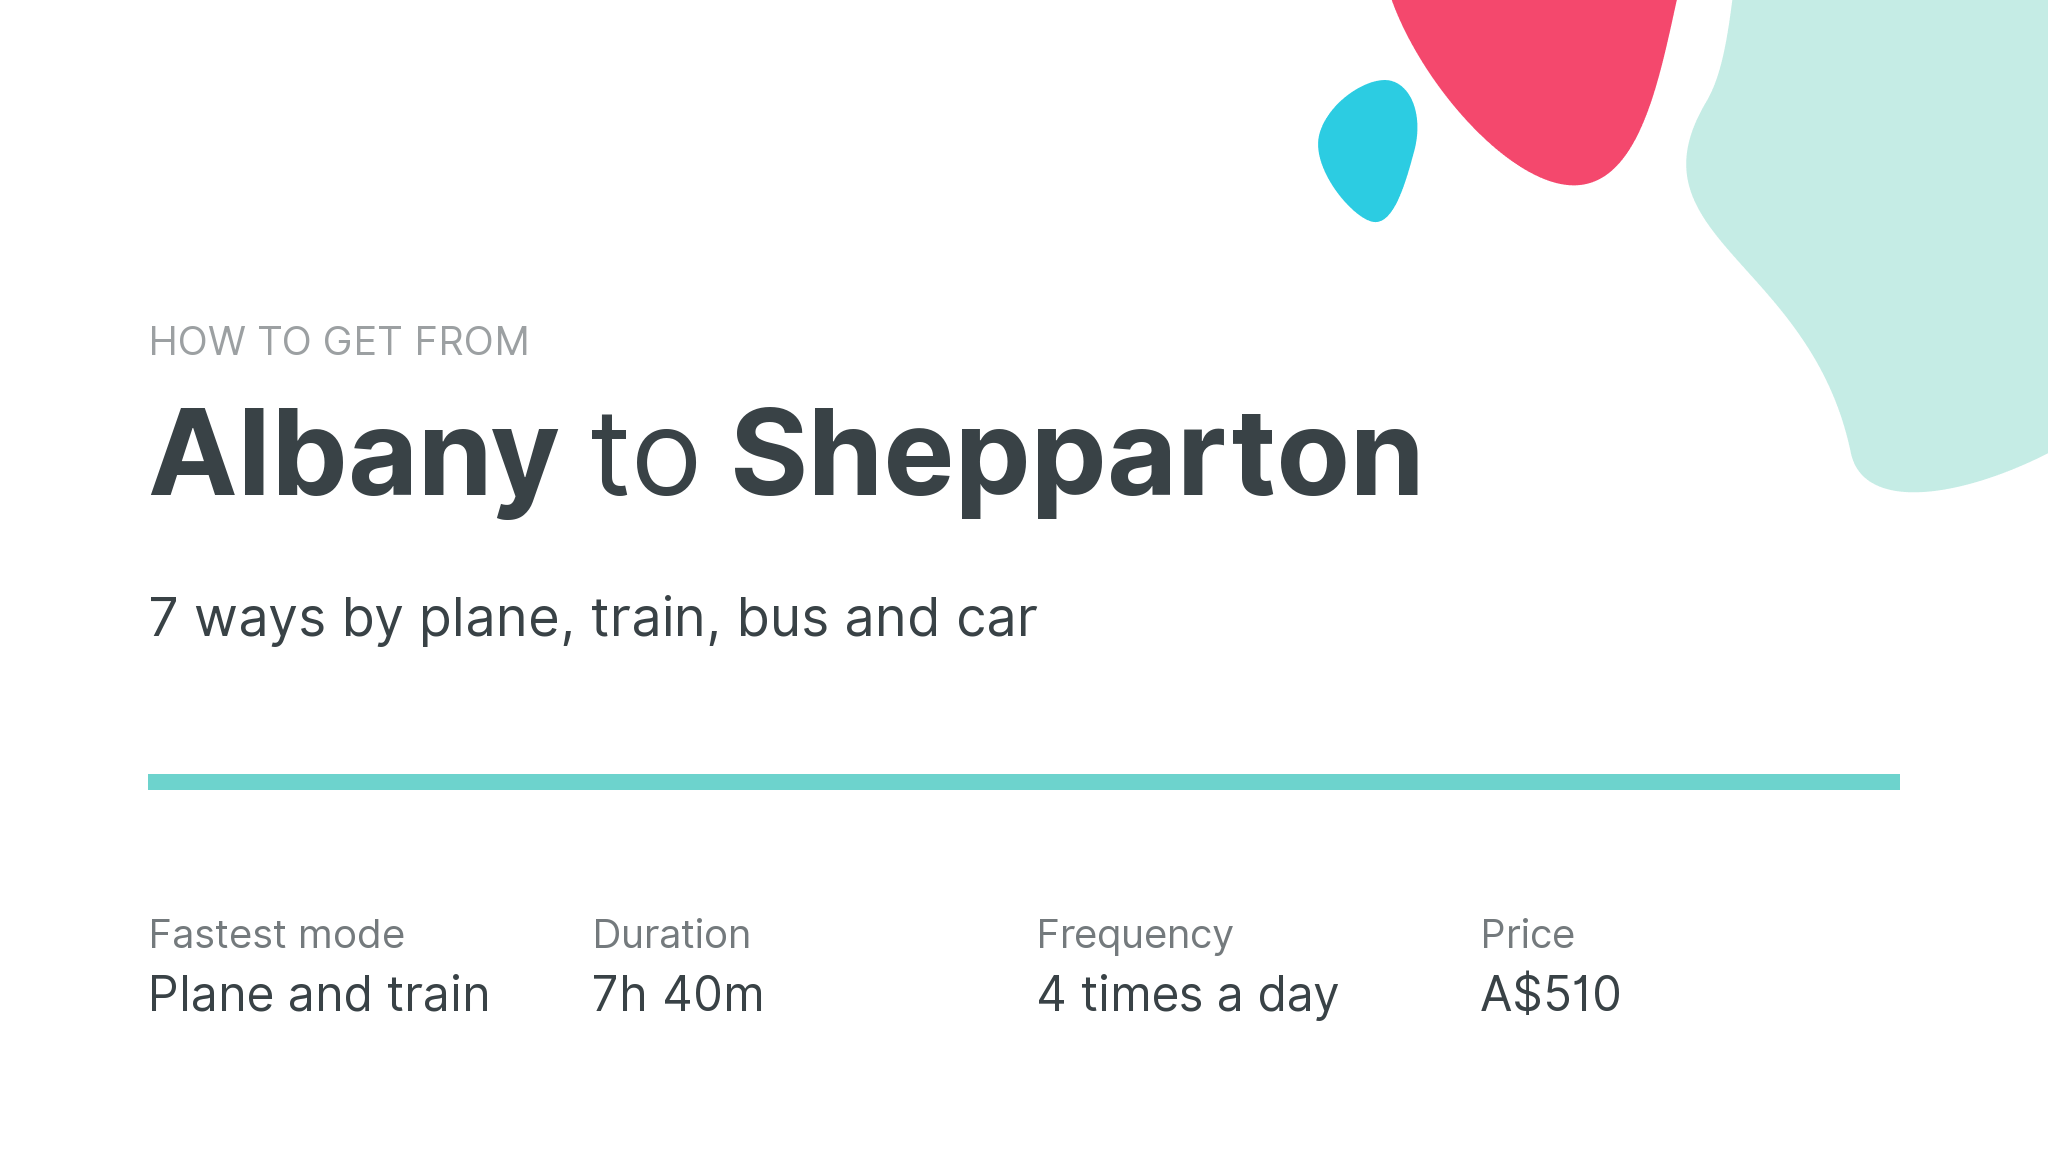 How do I get from Albany to Shepparton